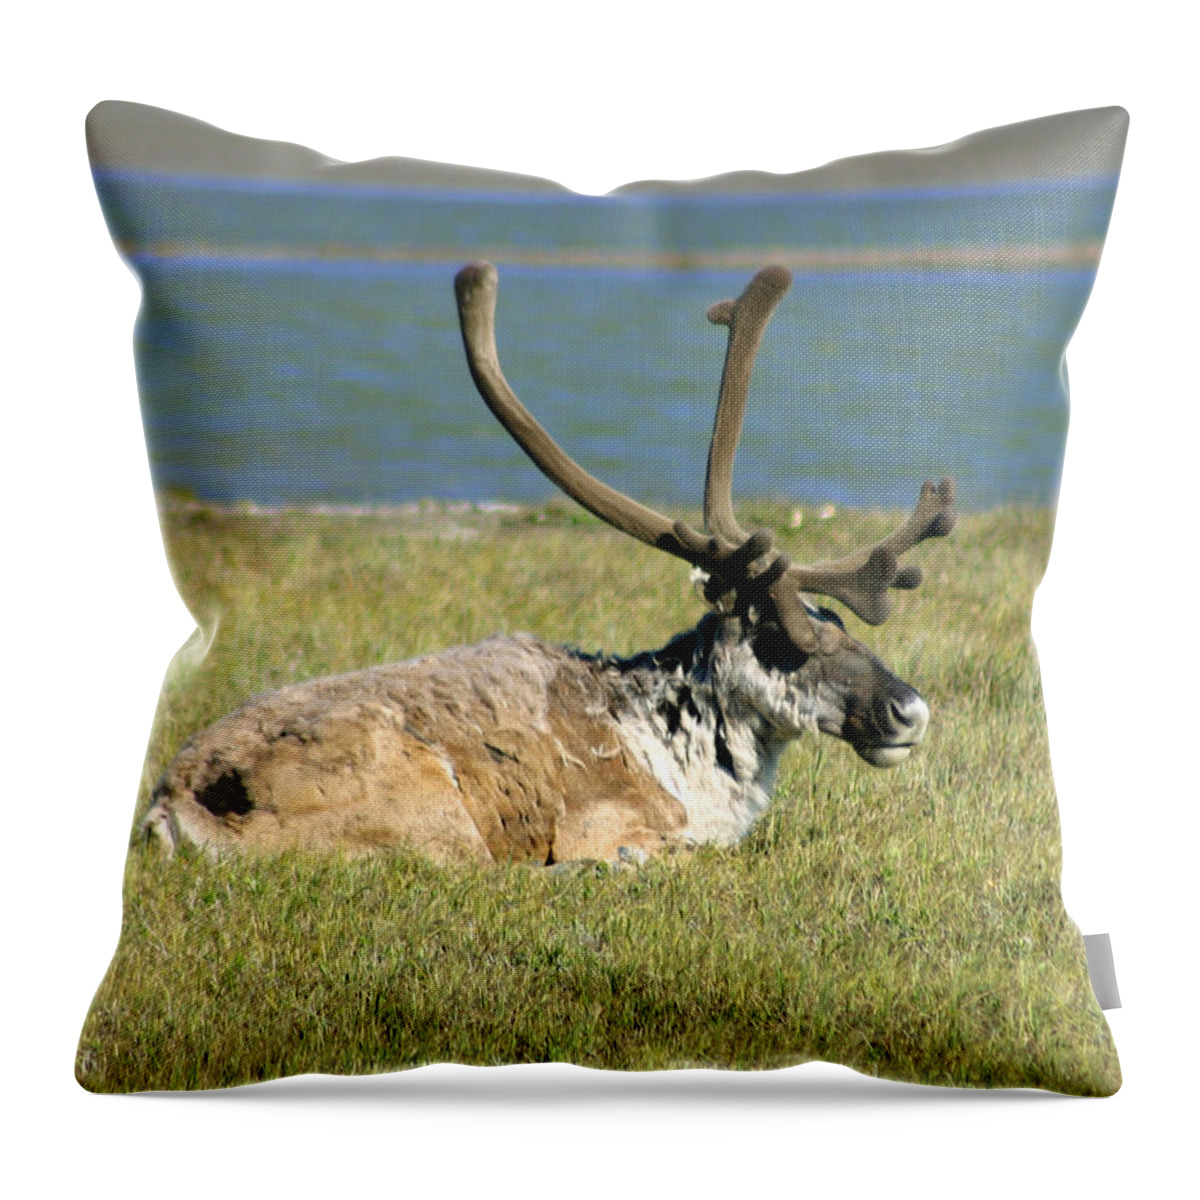 Caribou Throw Pillow featuring the photograph Caribou Resting by Anthony Jones